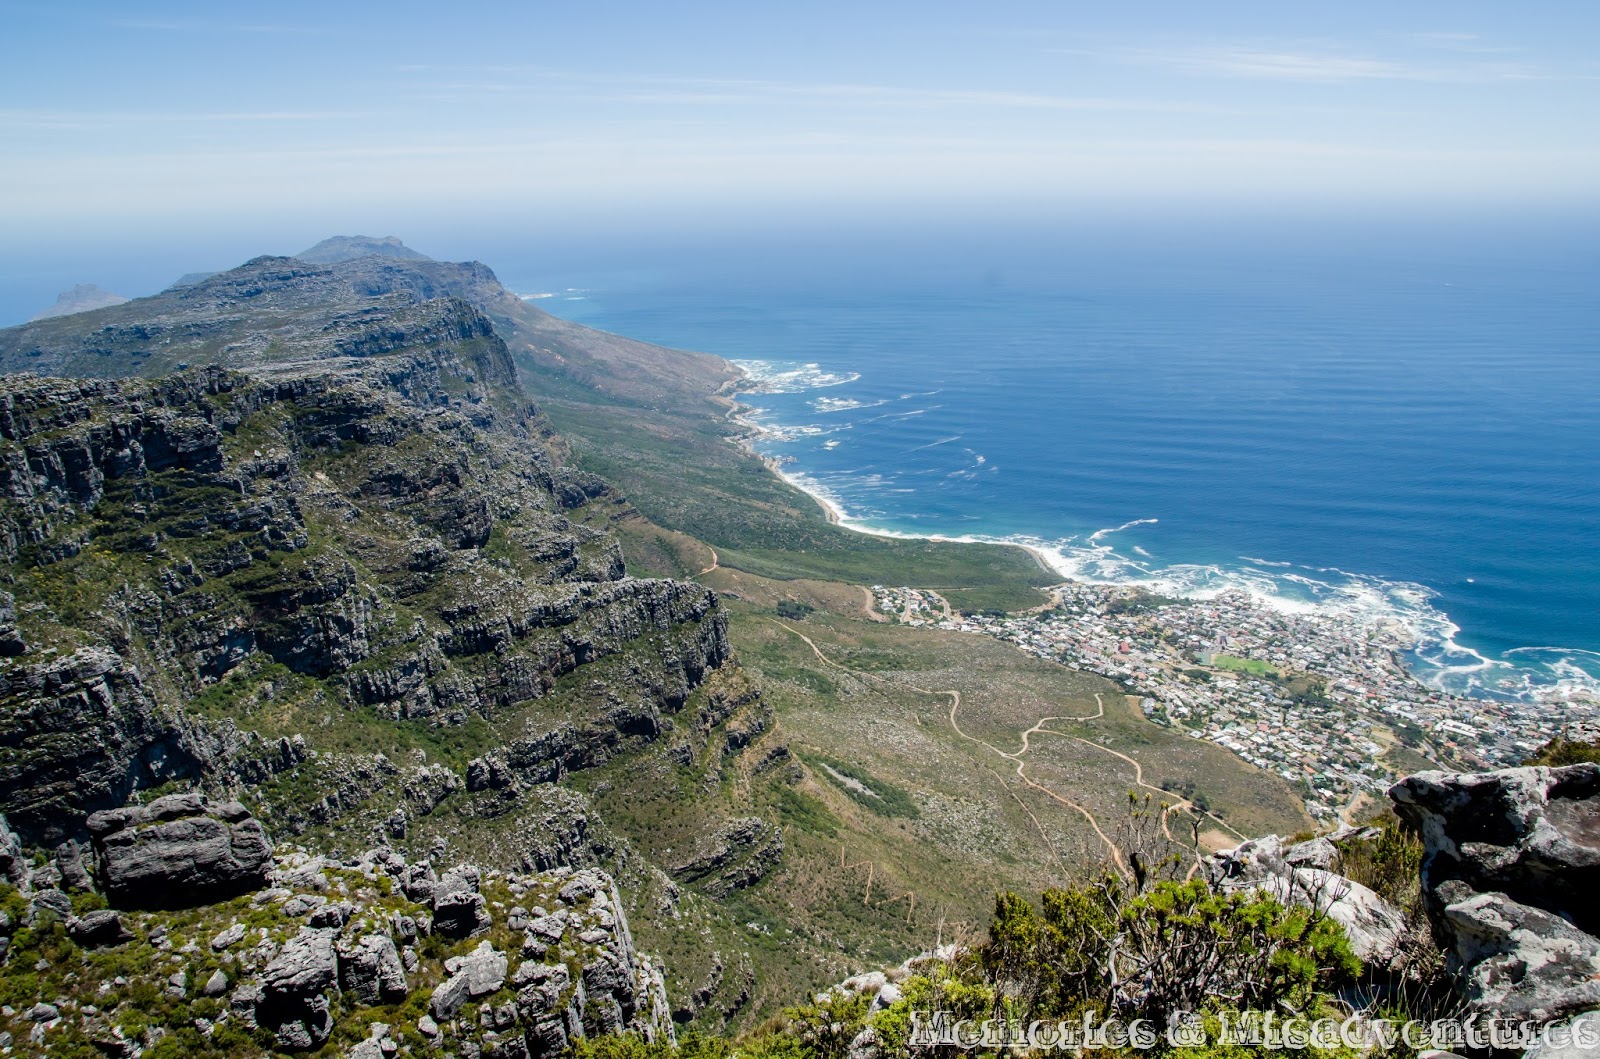 Memories and Misadventures: Table Mountain, Cape Town